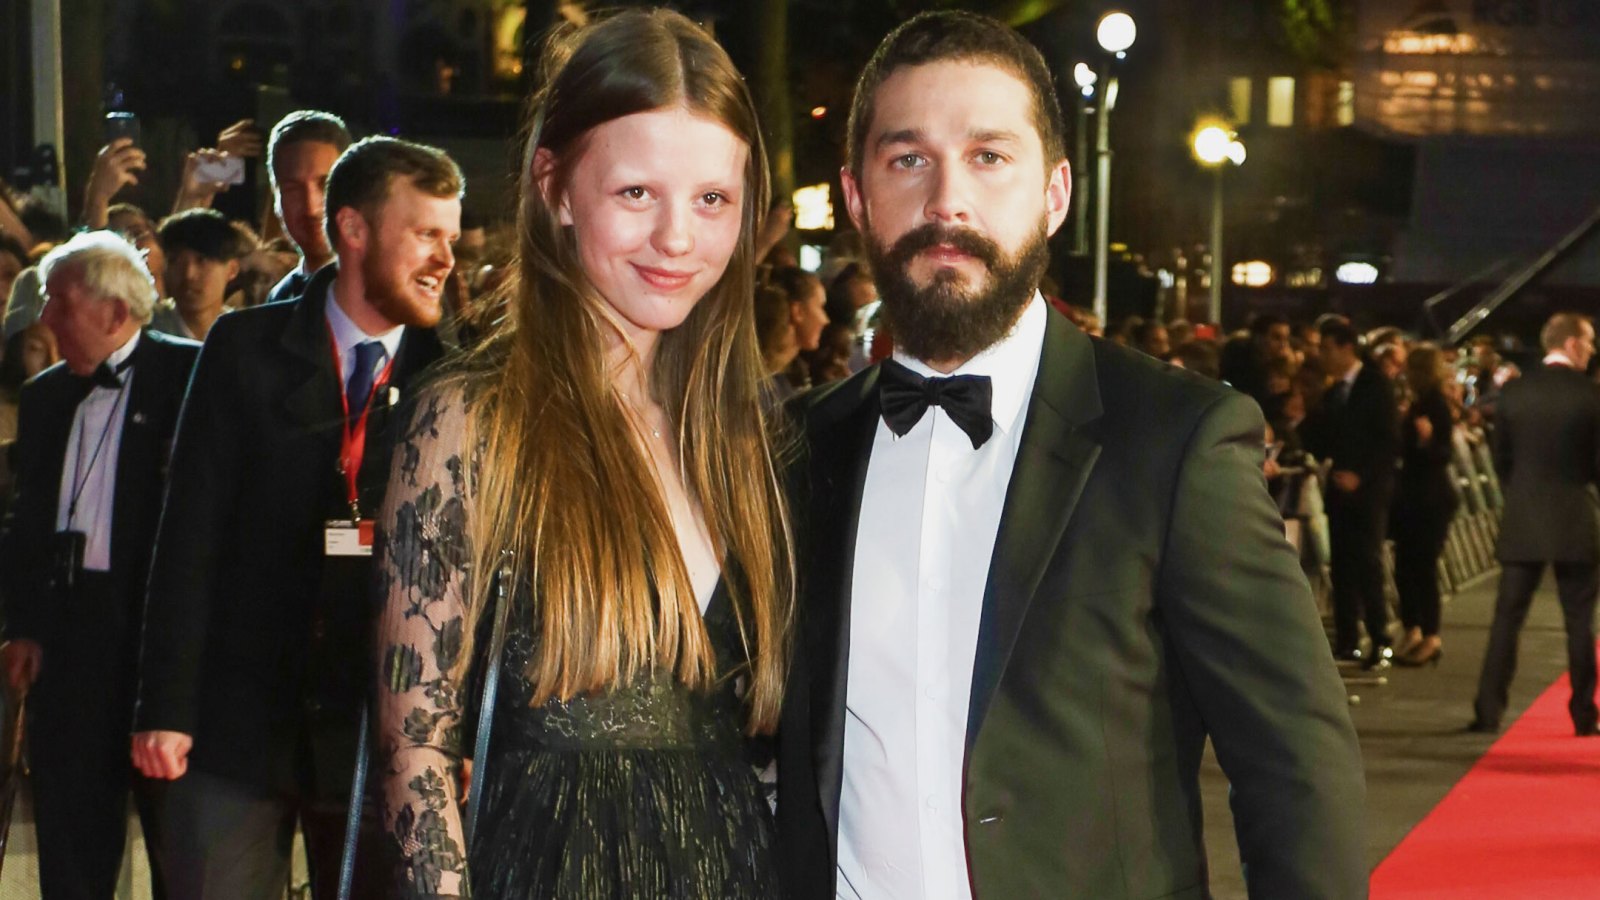 Shia LaBeouf Reunites With Ex-Wife Mia Goth Nearly 2 Years After Separating